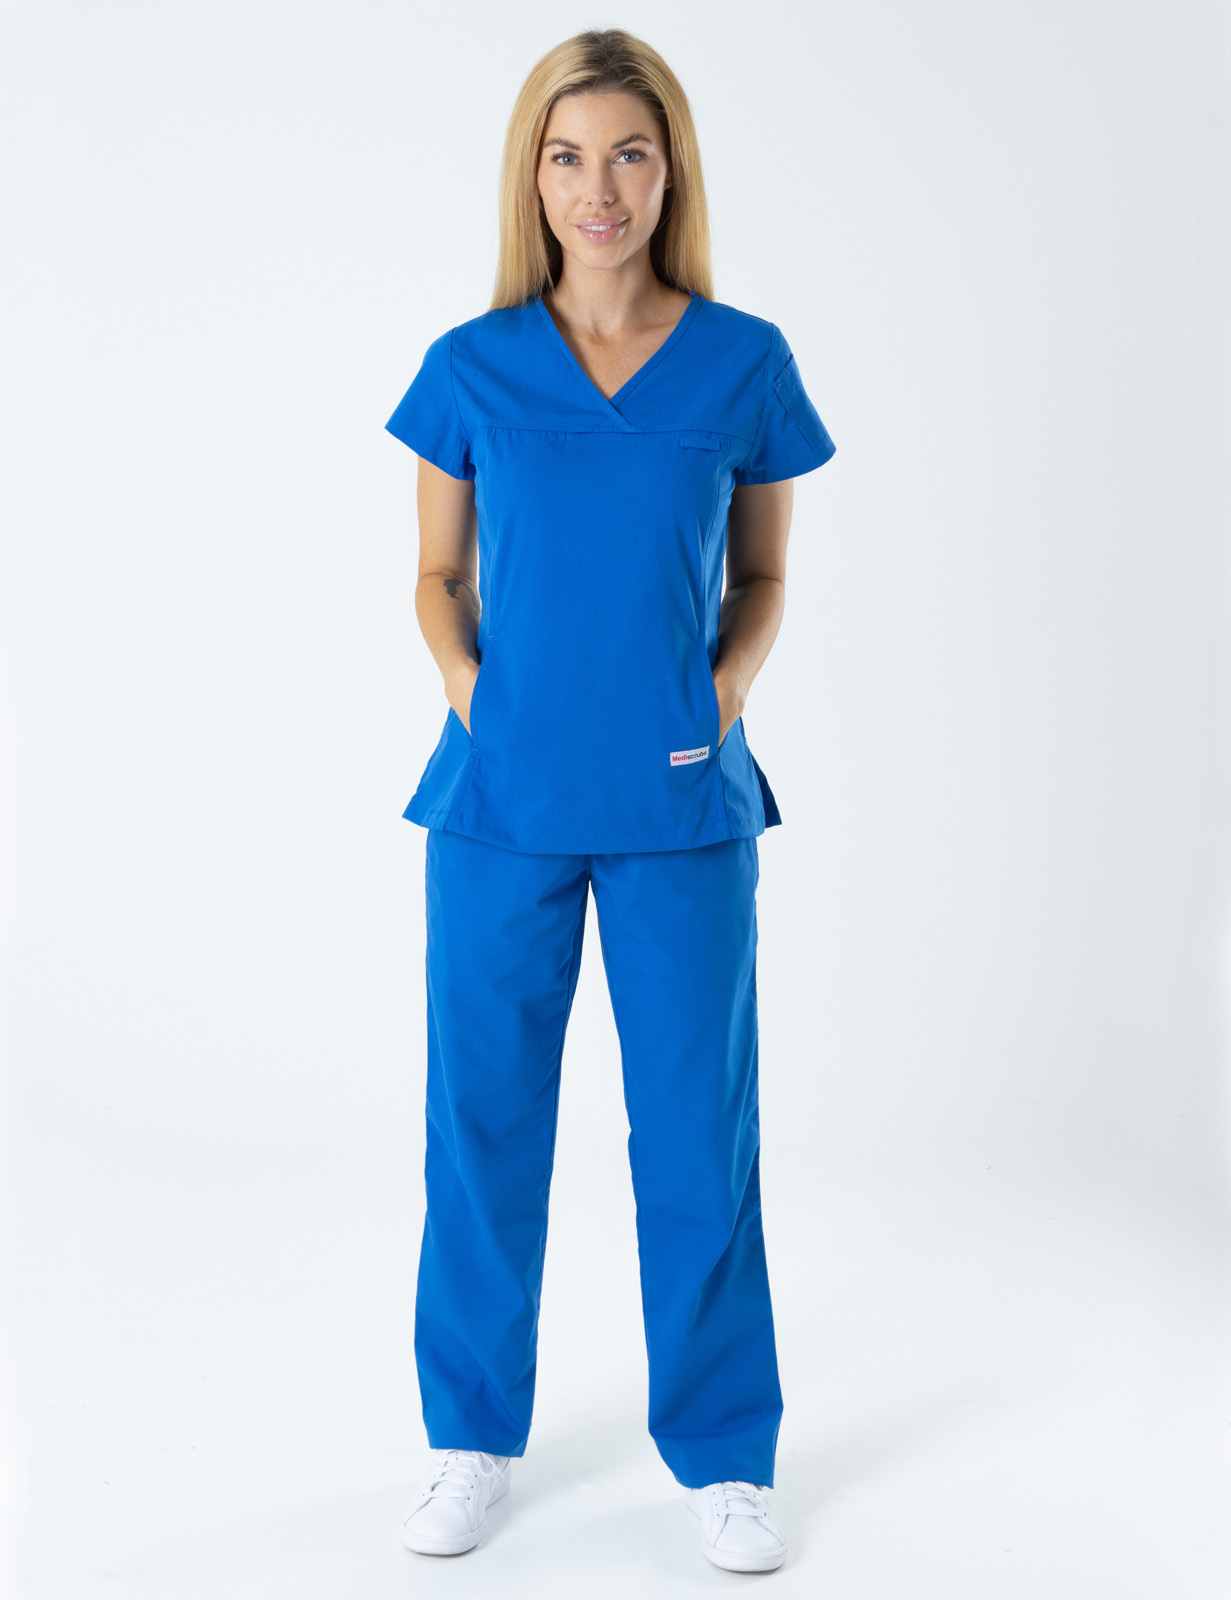 Nambour Hospital - MI NMT (Women's Fit Solid Scrub Top and Cargo Pants in Royal incl Logos)